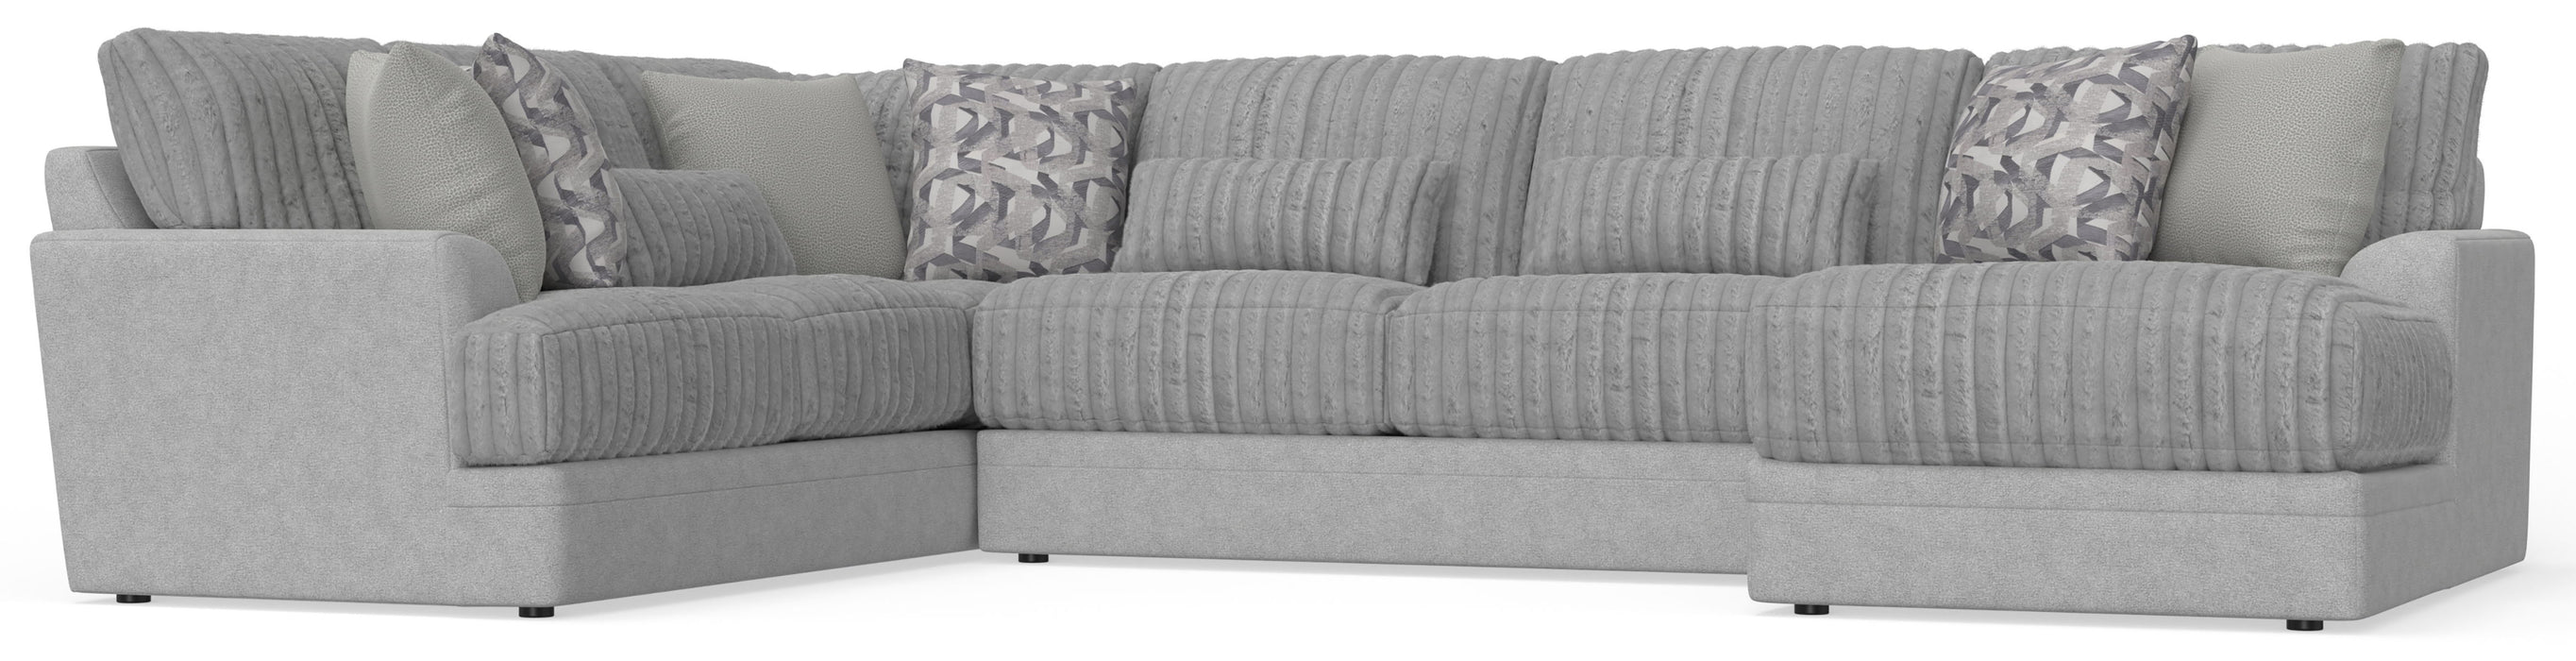 Titan - Sectional With Comfort Coil Seating And Accent Pillows